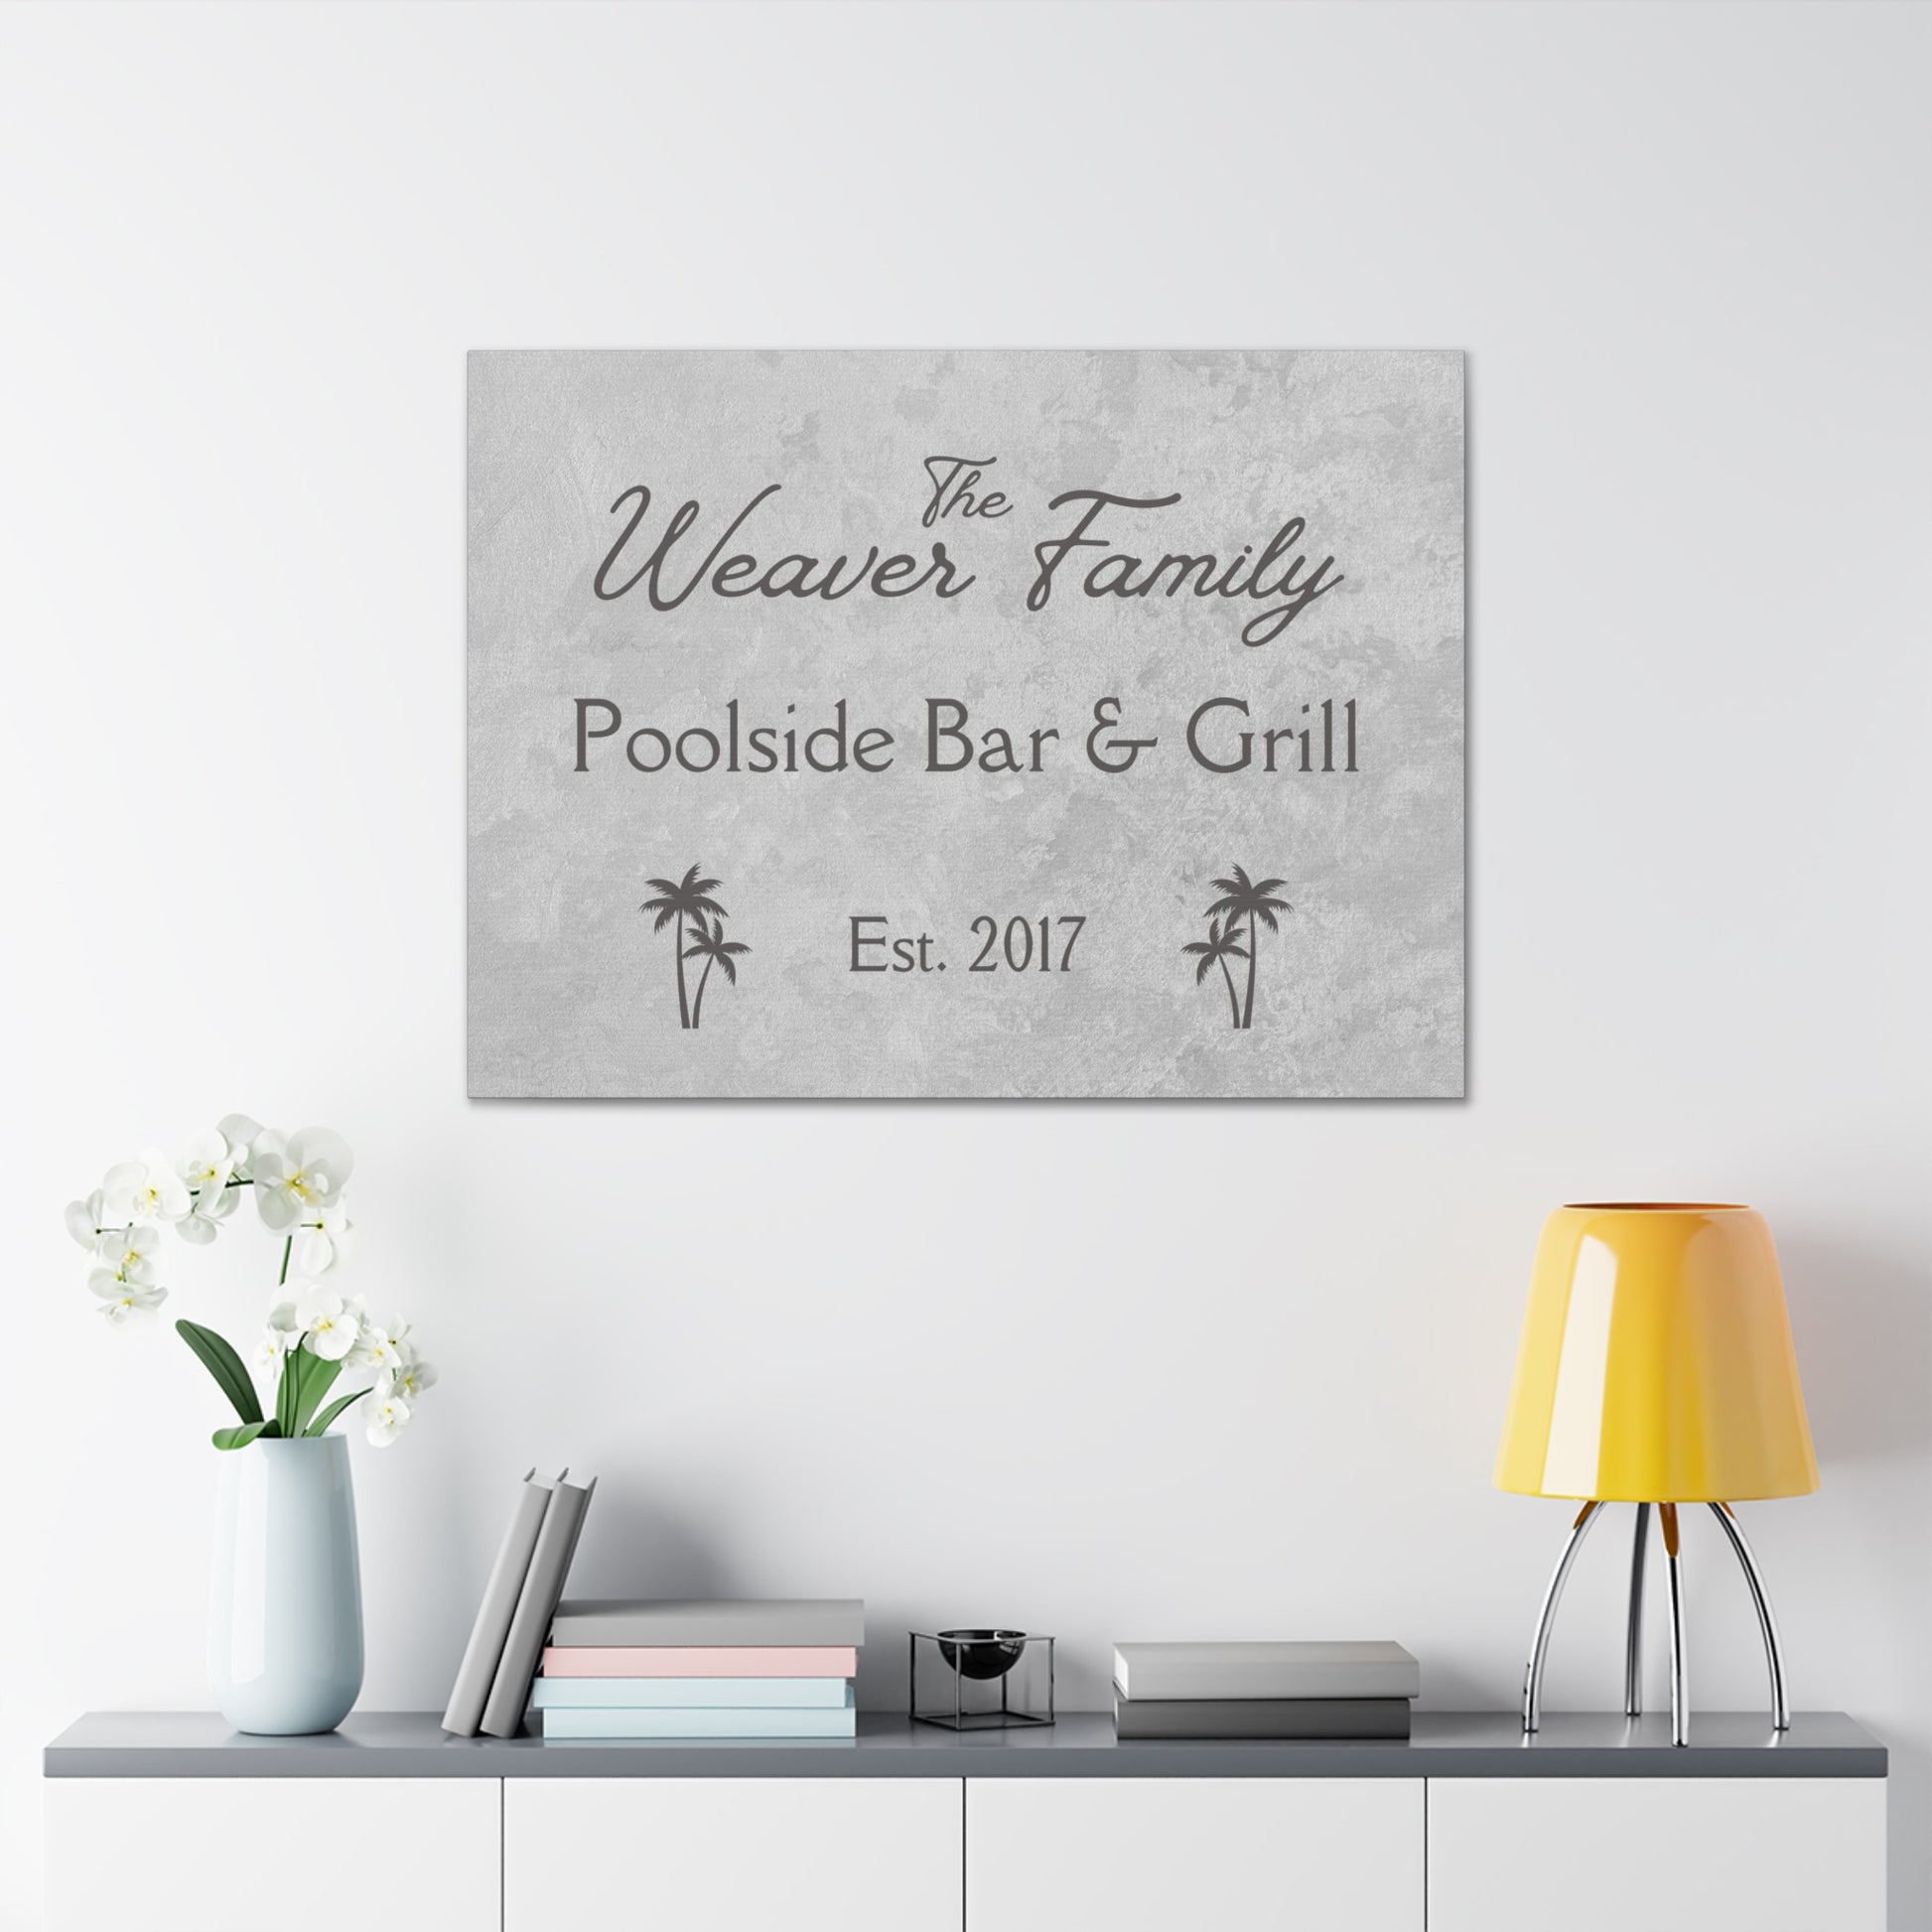 Custom "Family Poolside Bar & Grill" Wall Art - Weave Got Gifts - Unique Gifts You Won’t Find Anywhere Else!